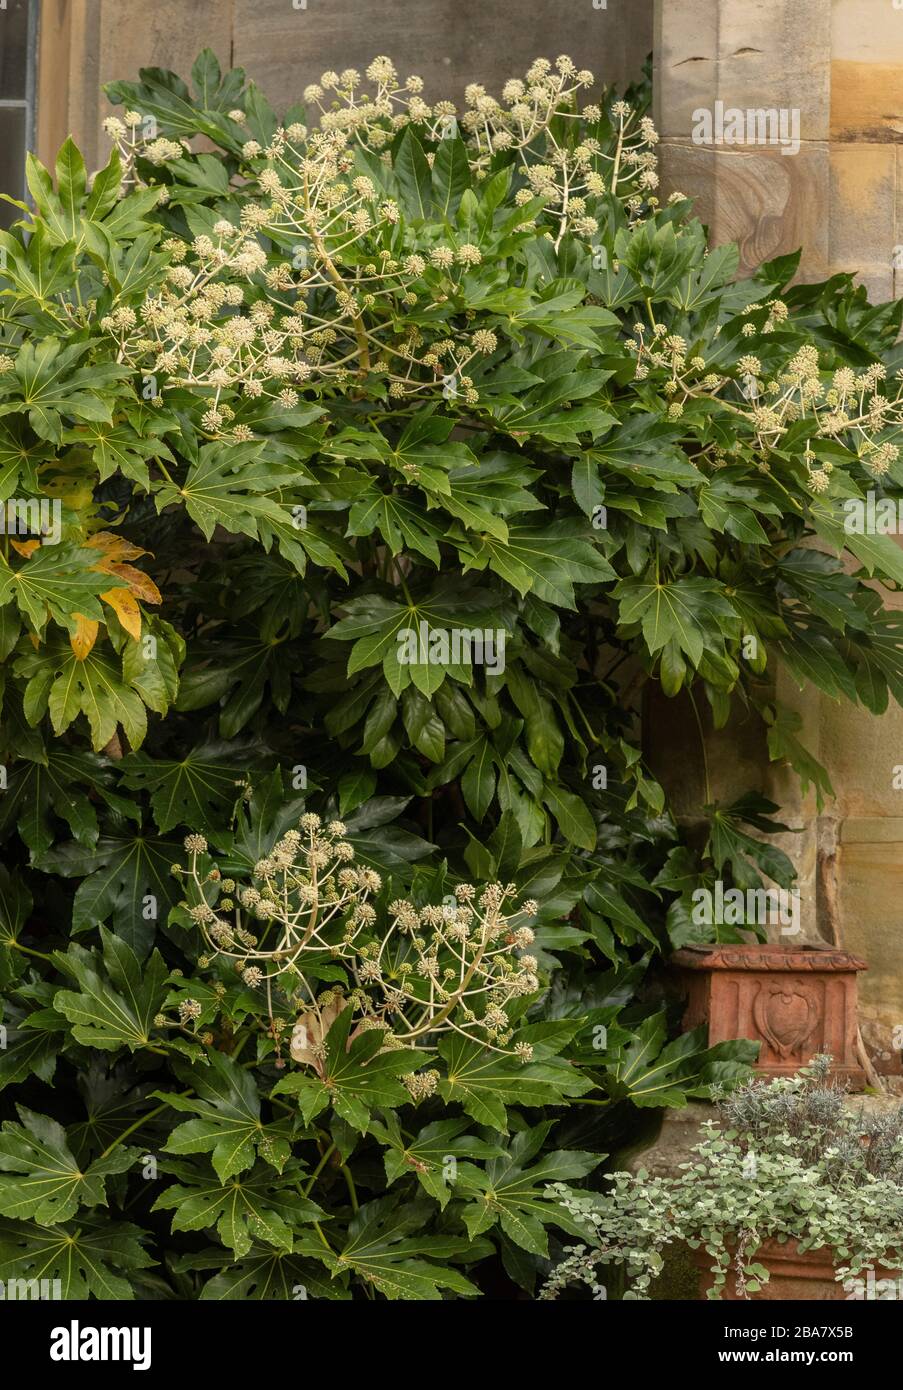 Japanese aralia, Fatsia japonica, in flower in sheltered courtyard. Stock Photo